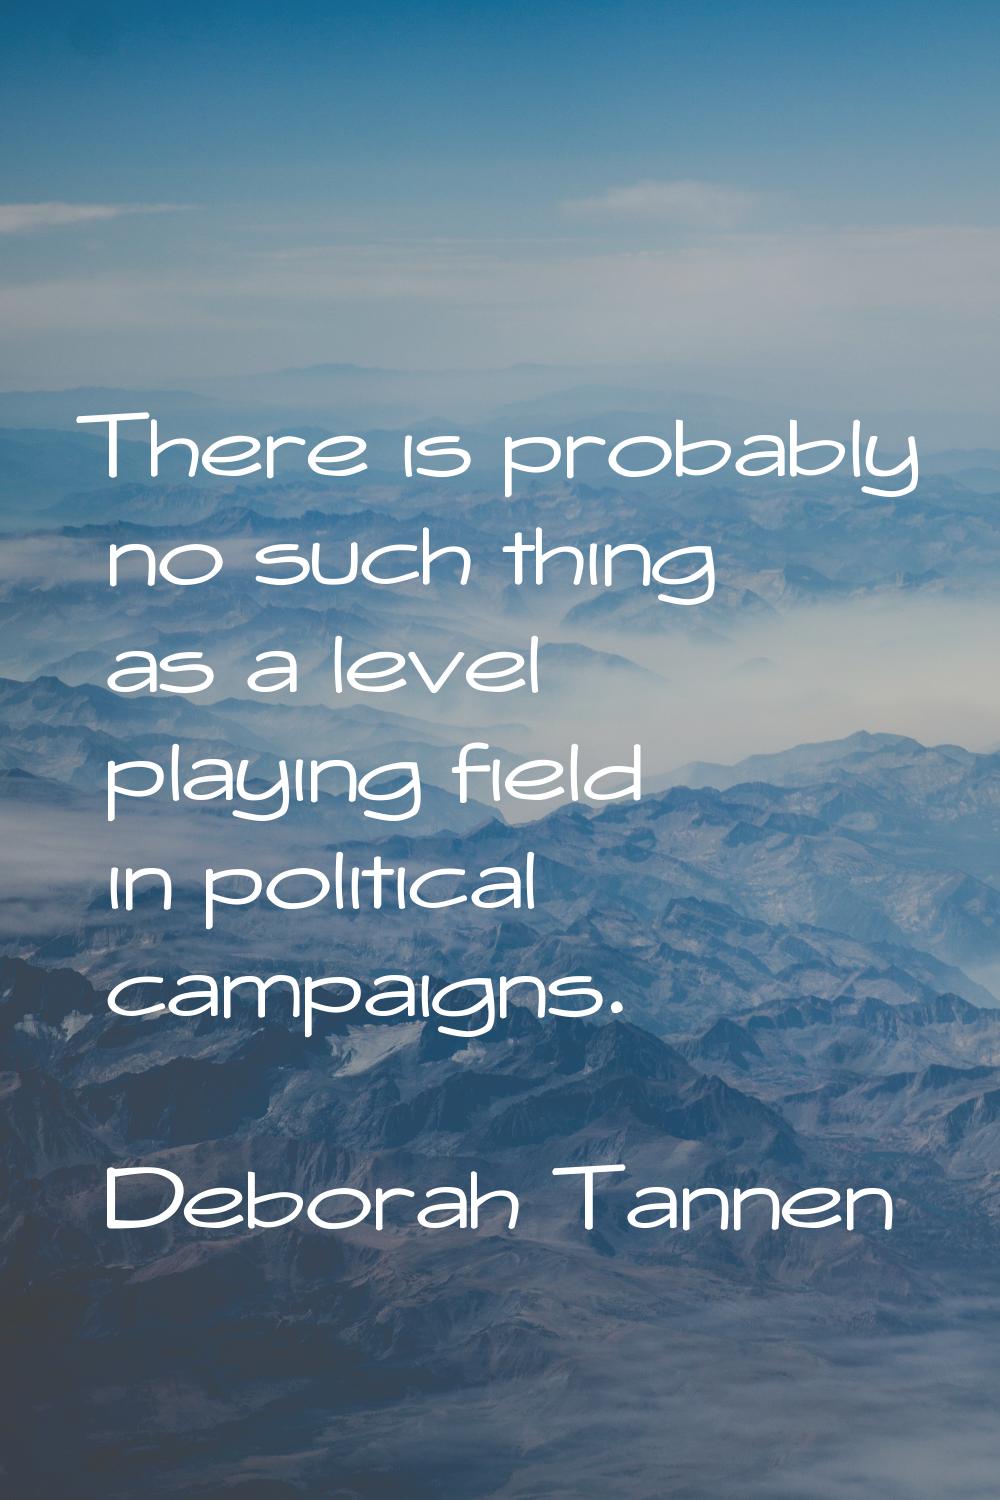 There is probably no such thing as a level playing field in political campaigns.